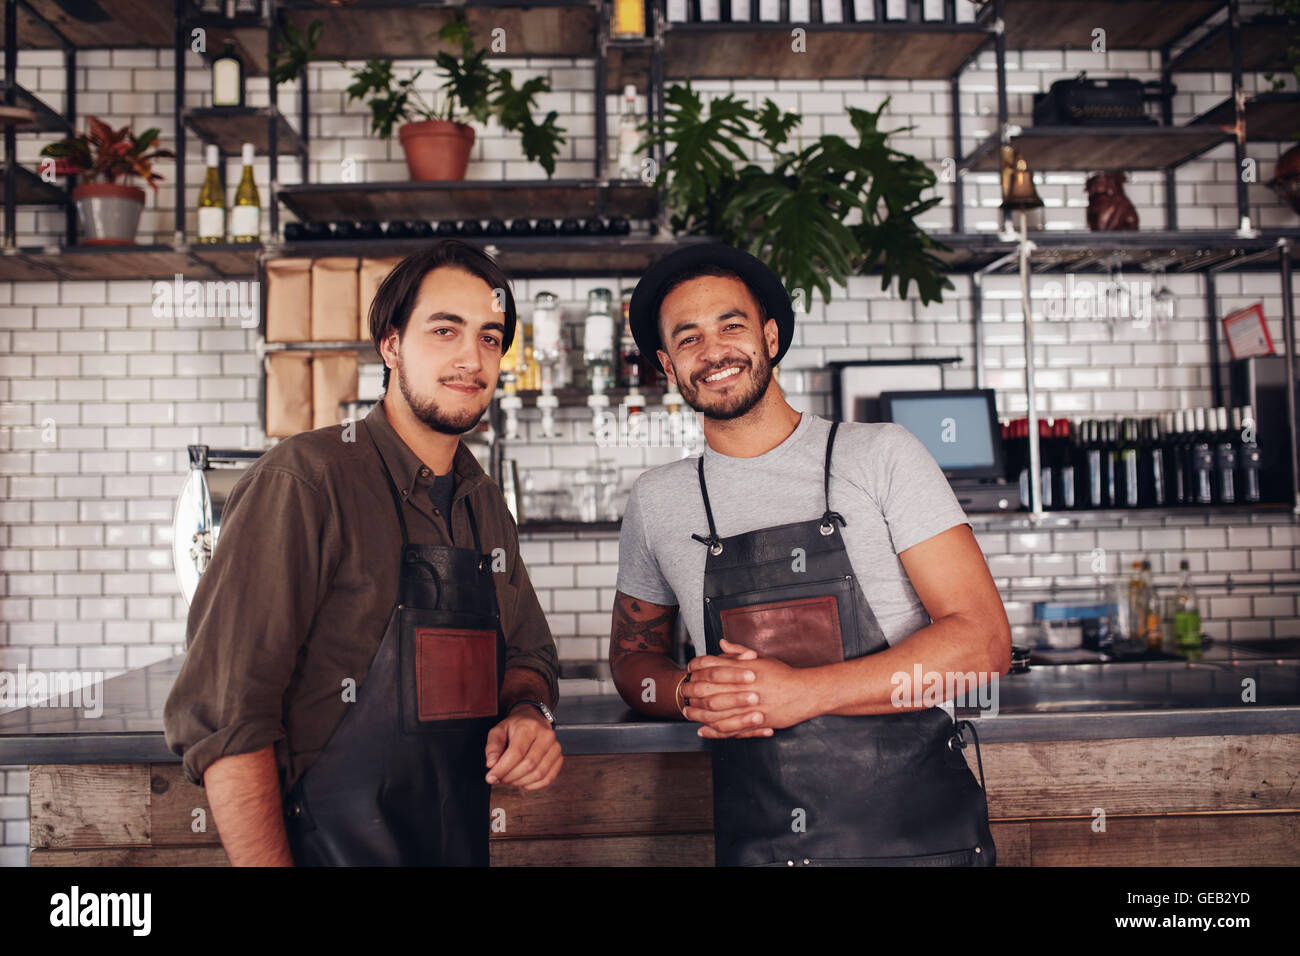 Portrait of two young coffee shop owners at the counter. Cafe partners standing together and looking at camera. Stock Photo